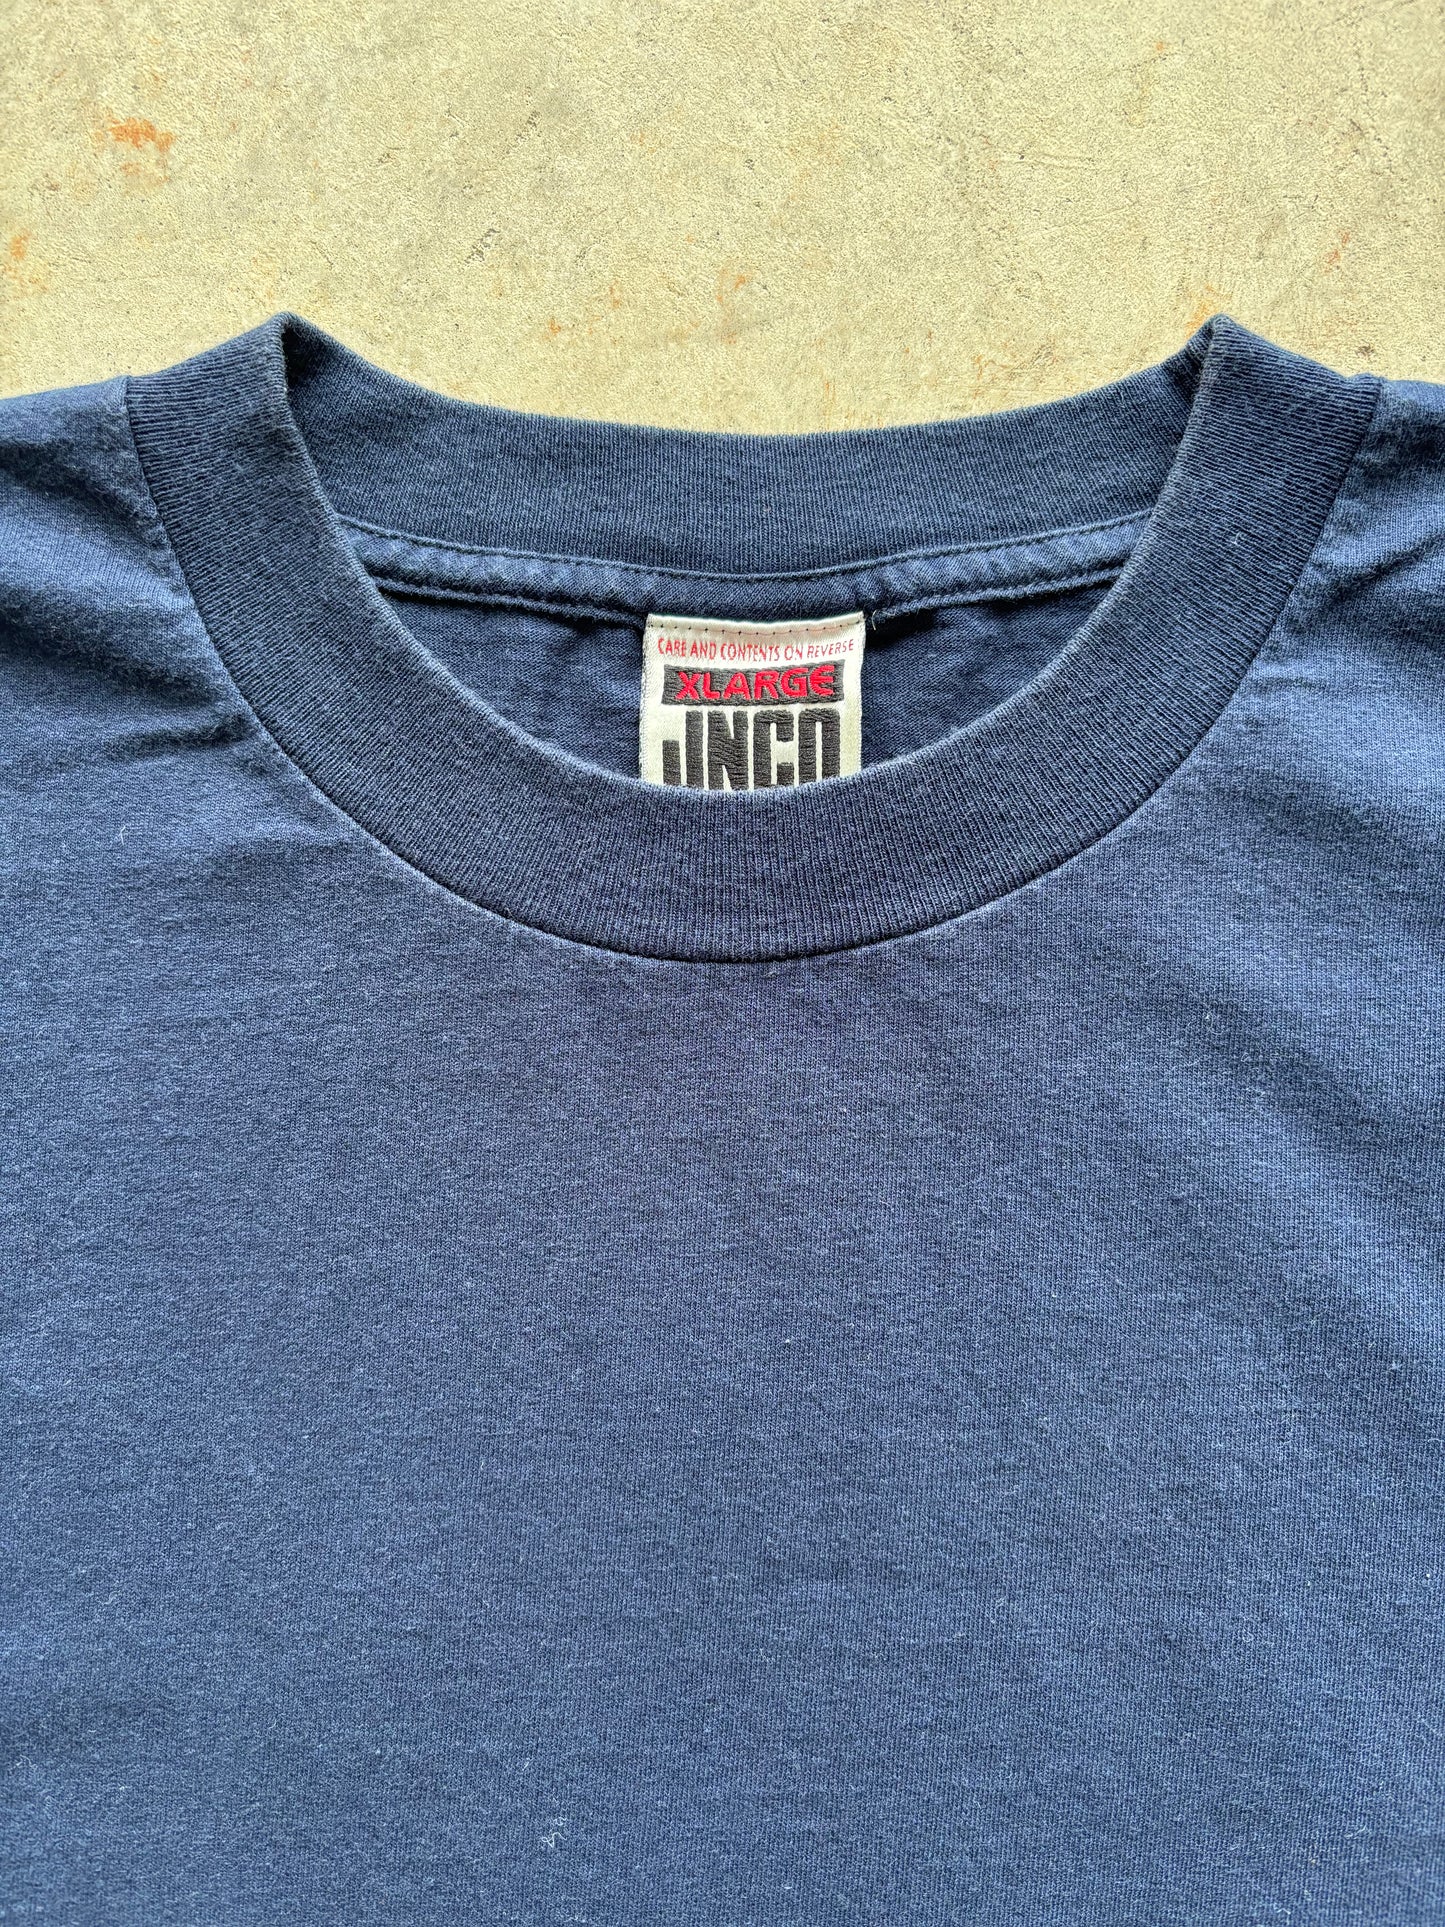 1990's Jnco Jeans Tee Size XL